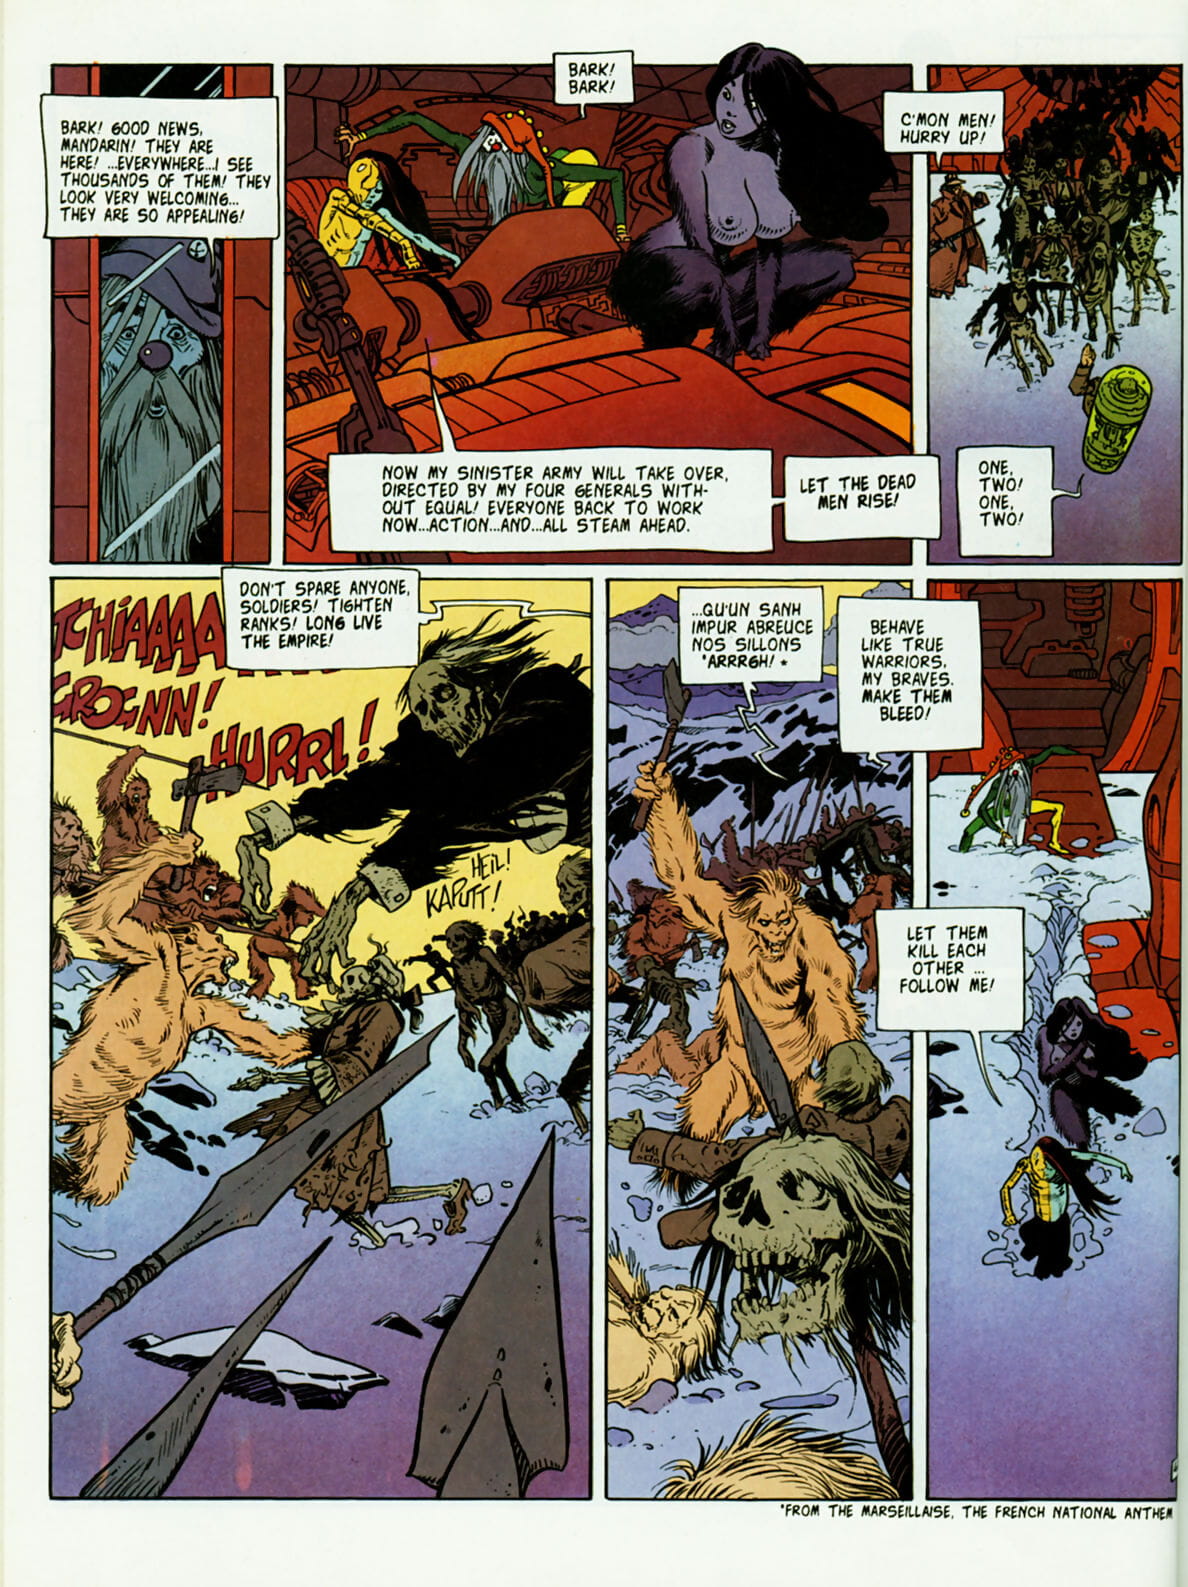 Heavy Metal Special - Pin-Ups - Vol.8-1 - part 3 page 1